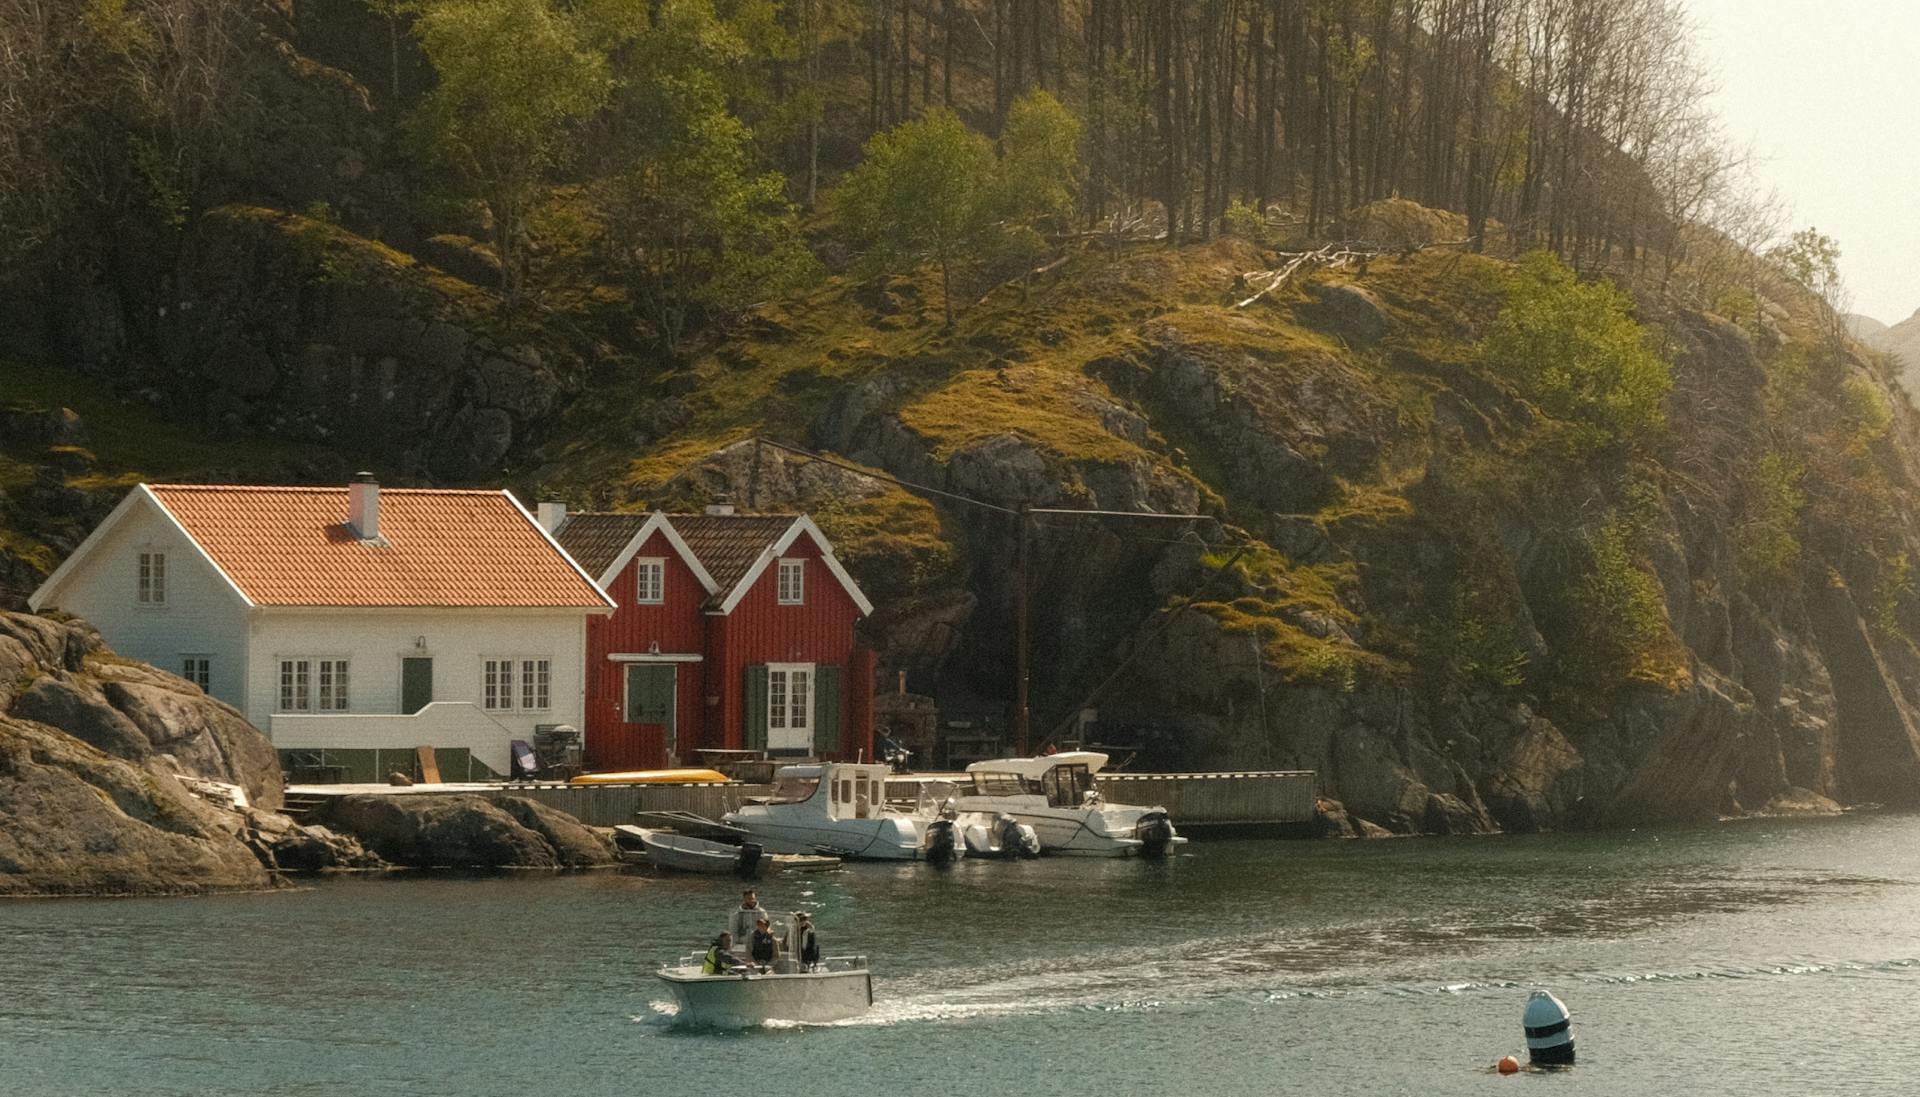 Western Norway with beautiful little summer houses along the coast